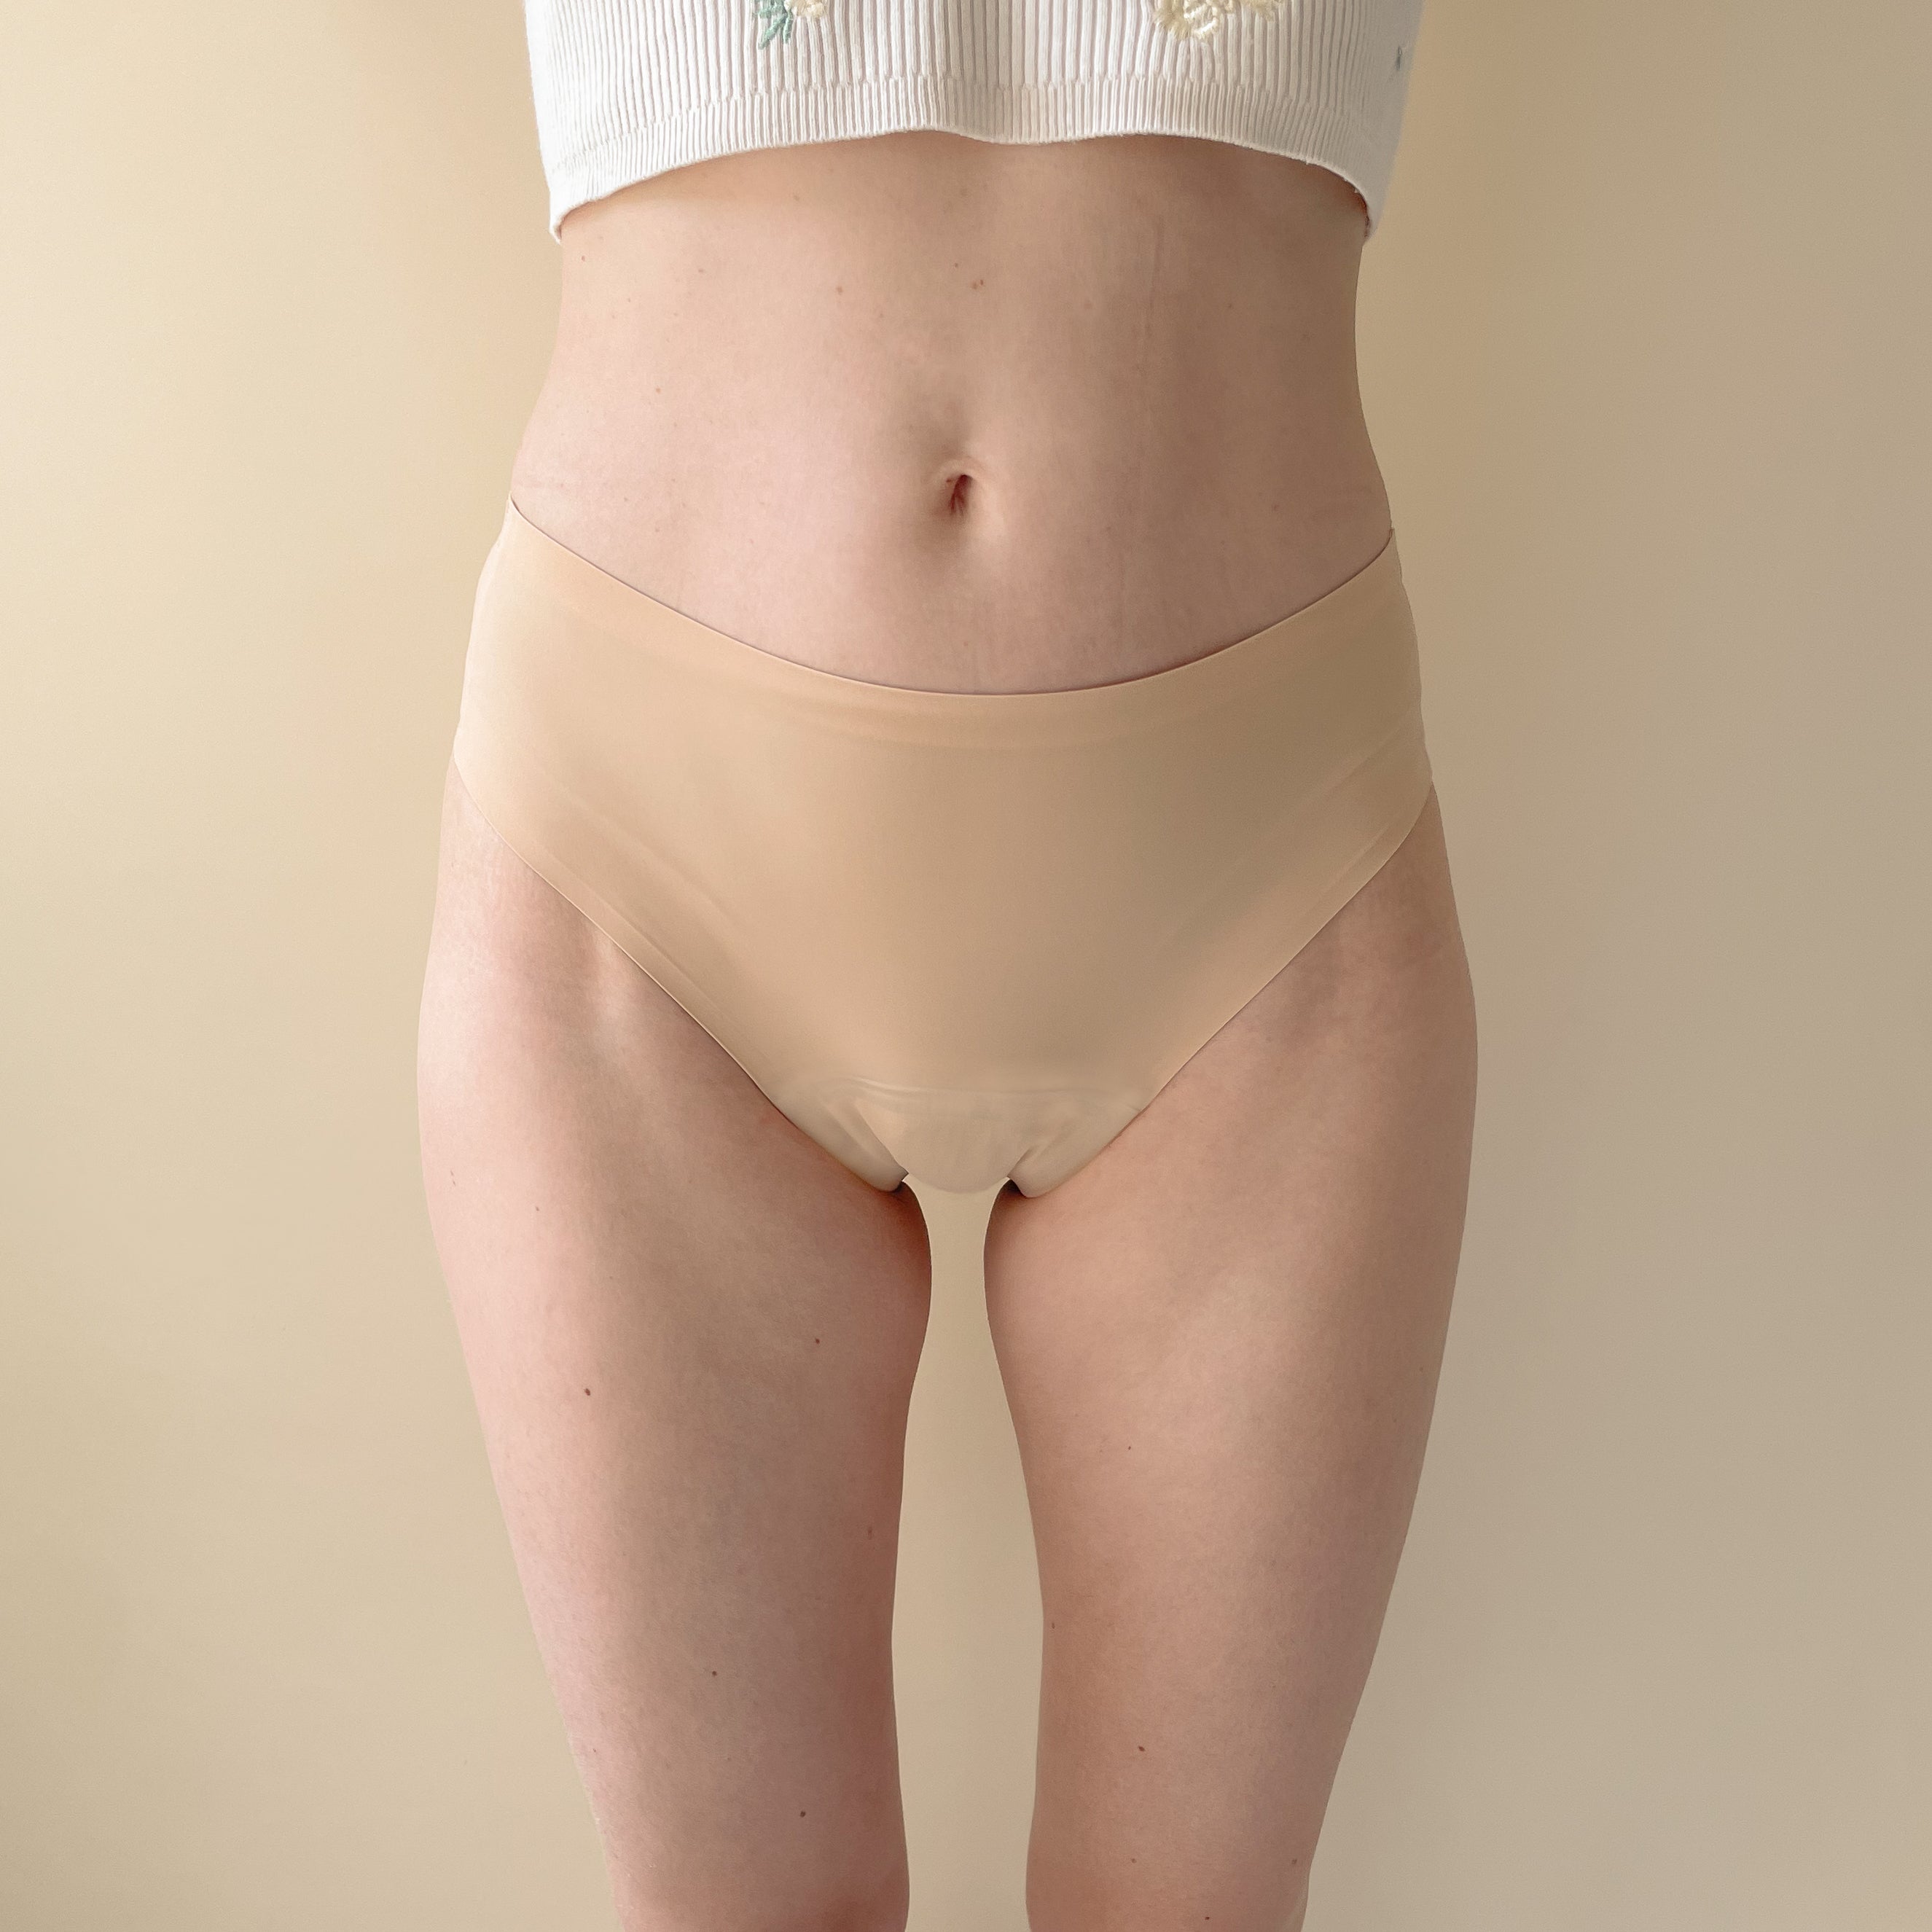 dais seamless period underwear with cheeky cut in beige colour made of nylon shown on model from the front.